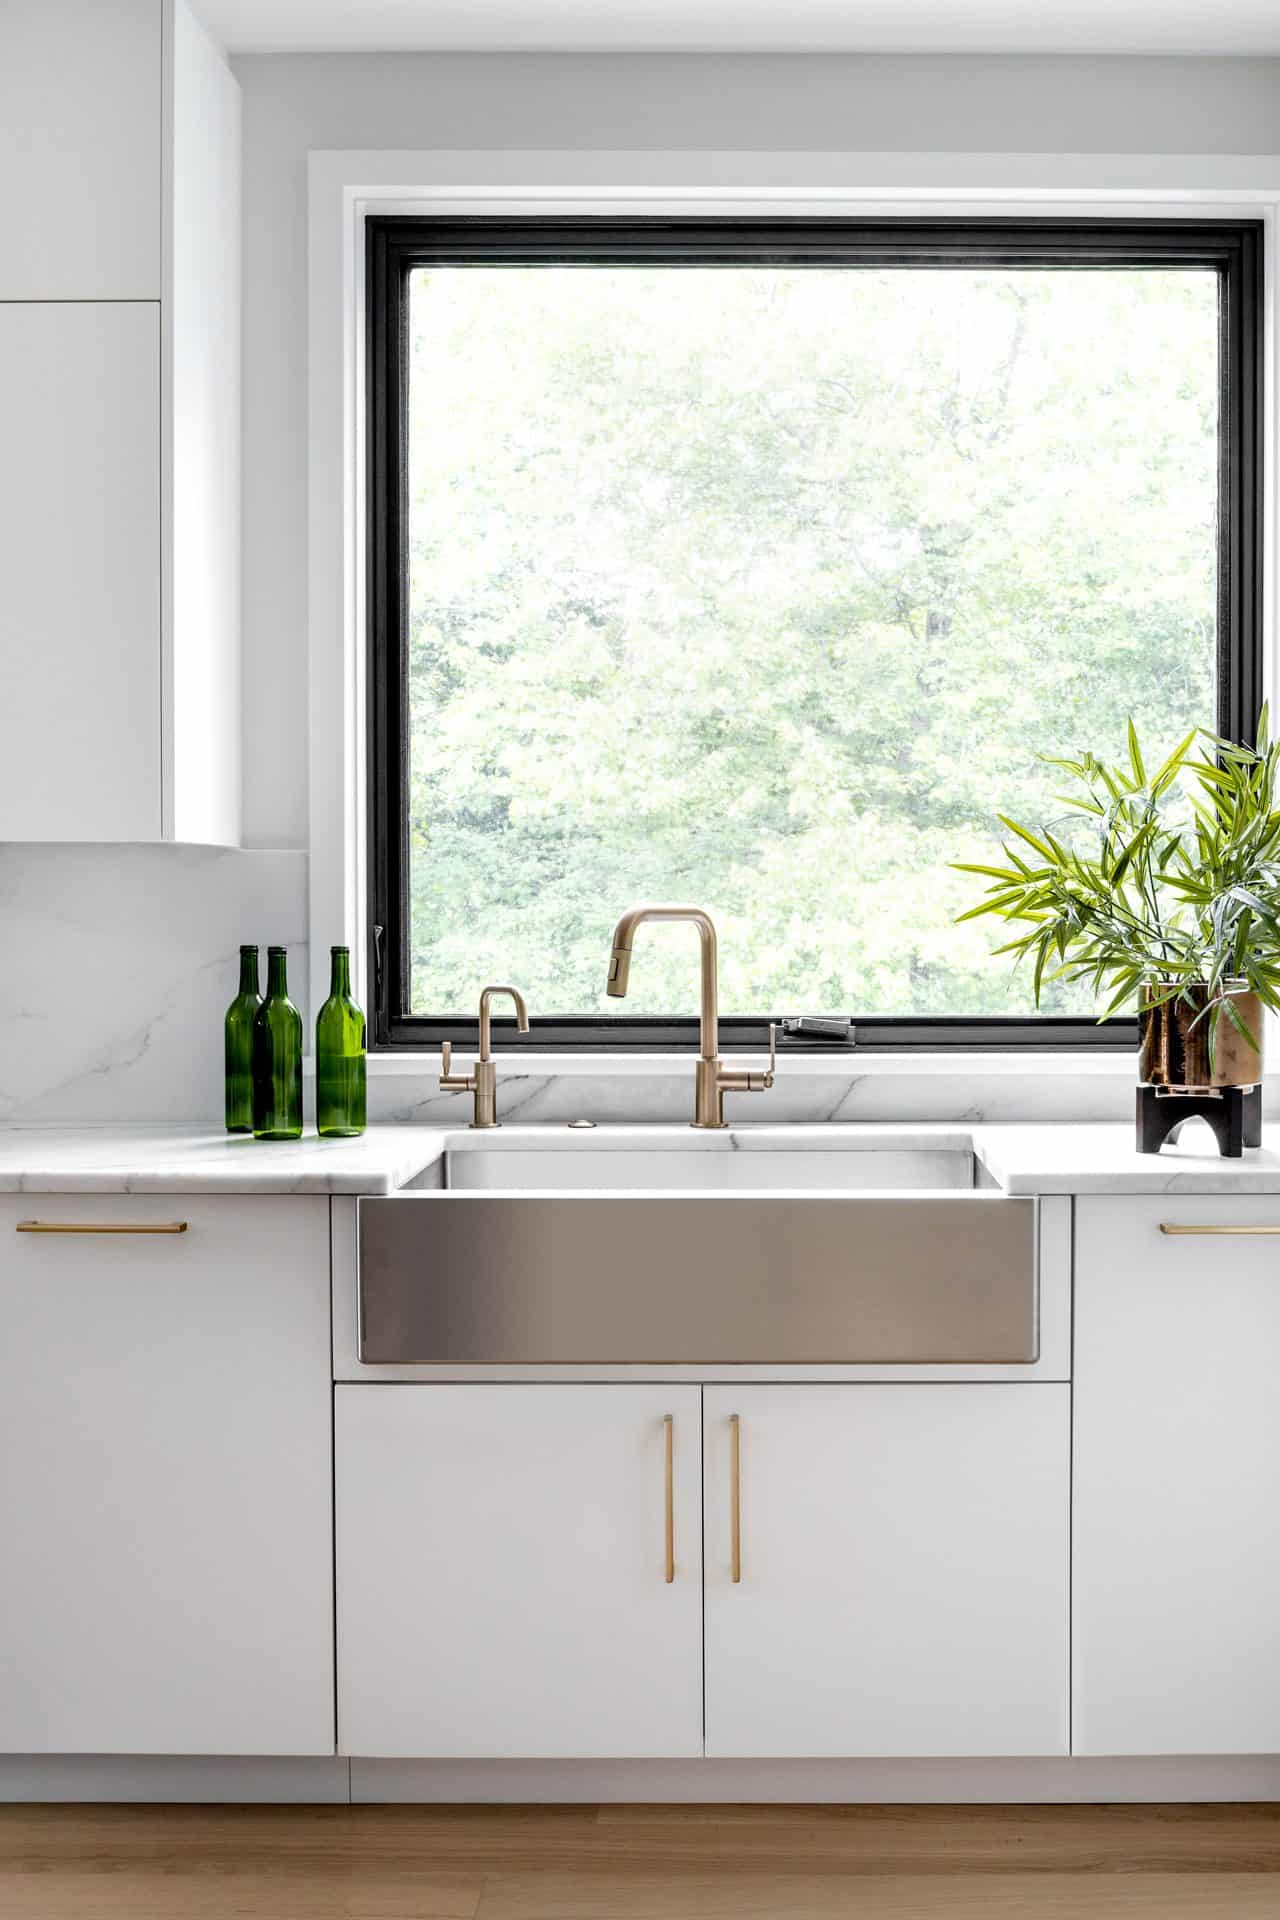 Modern kitchen with custom white Bilotta cabinetry and stainless steel farmhouse sink.